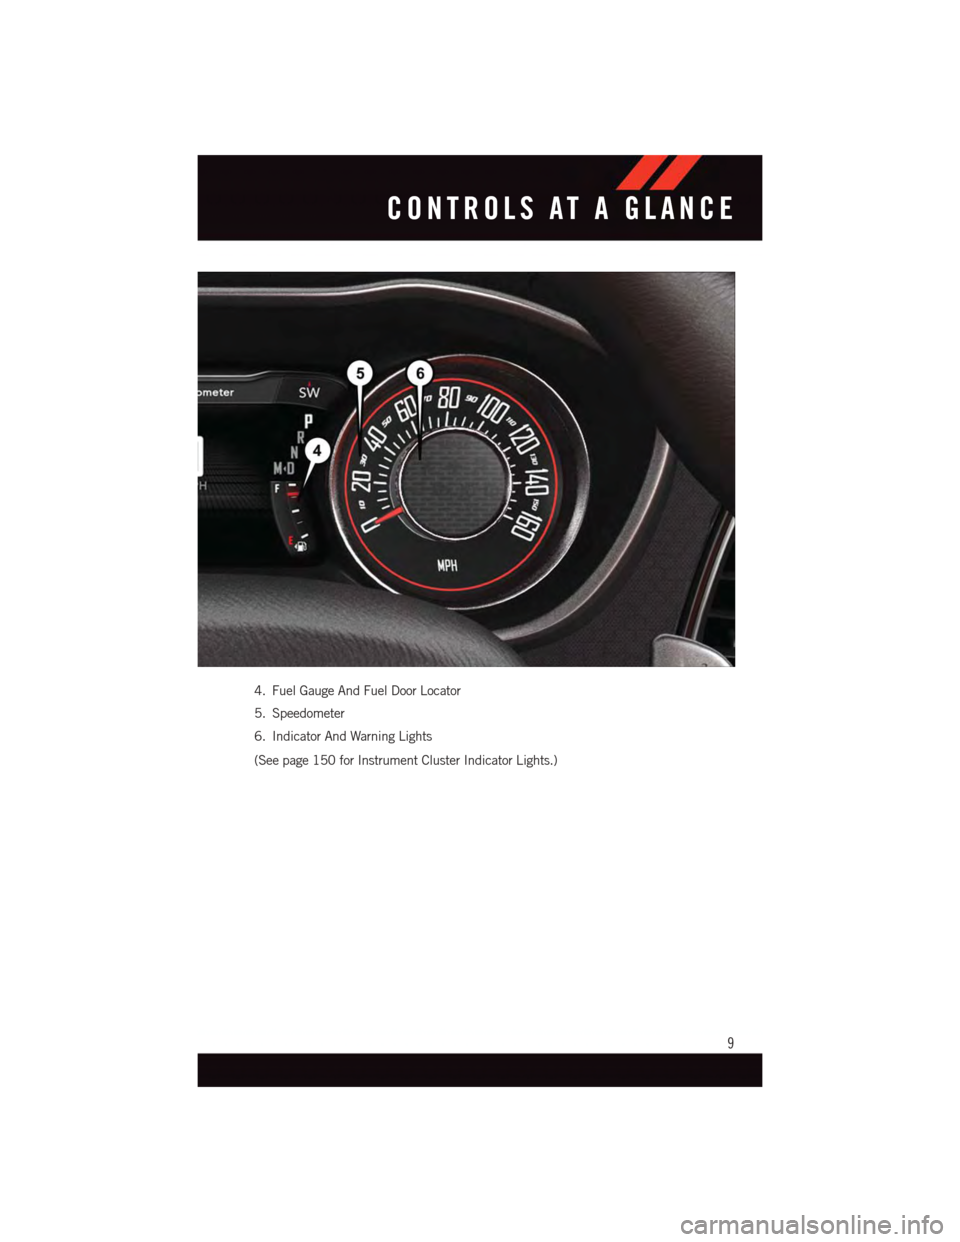 DODGE CHALLENGER 2015 3.G User Guide 4. Fuel Gauge And Fuel Door Locator
5. Speedometer
6. Indicator And Warning Lights
(See page 150 for Instrument Cluster Indicator Lights.)
CONTROLS AT A GLANCE
9 